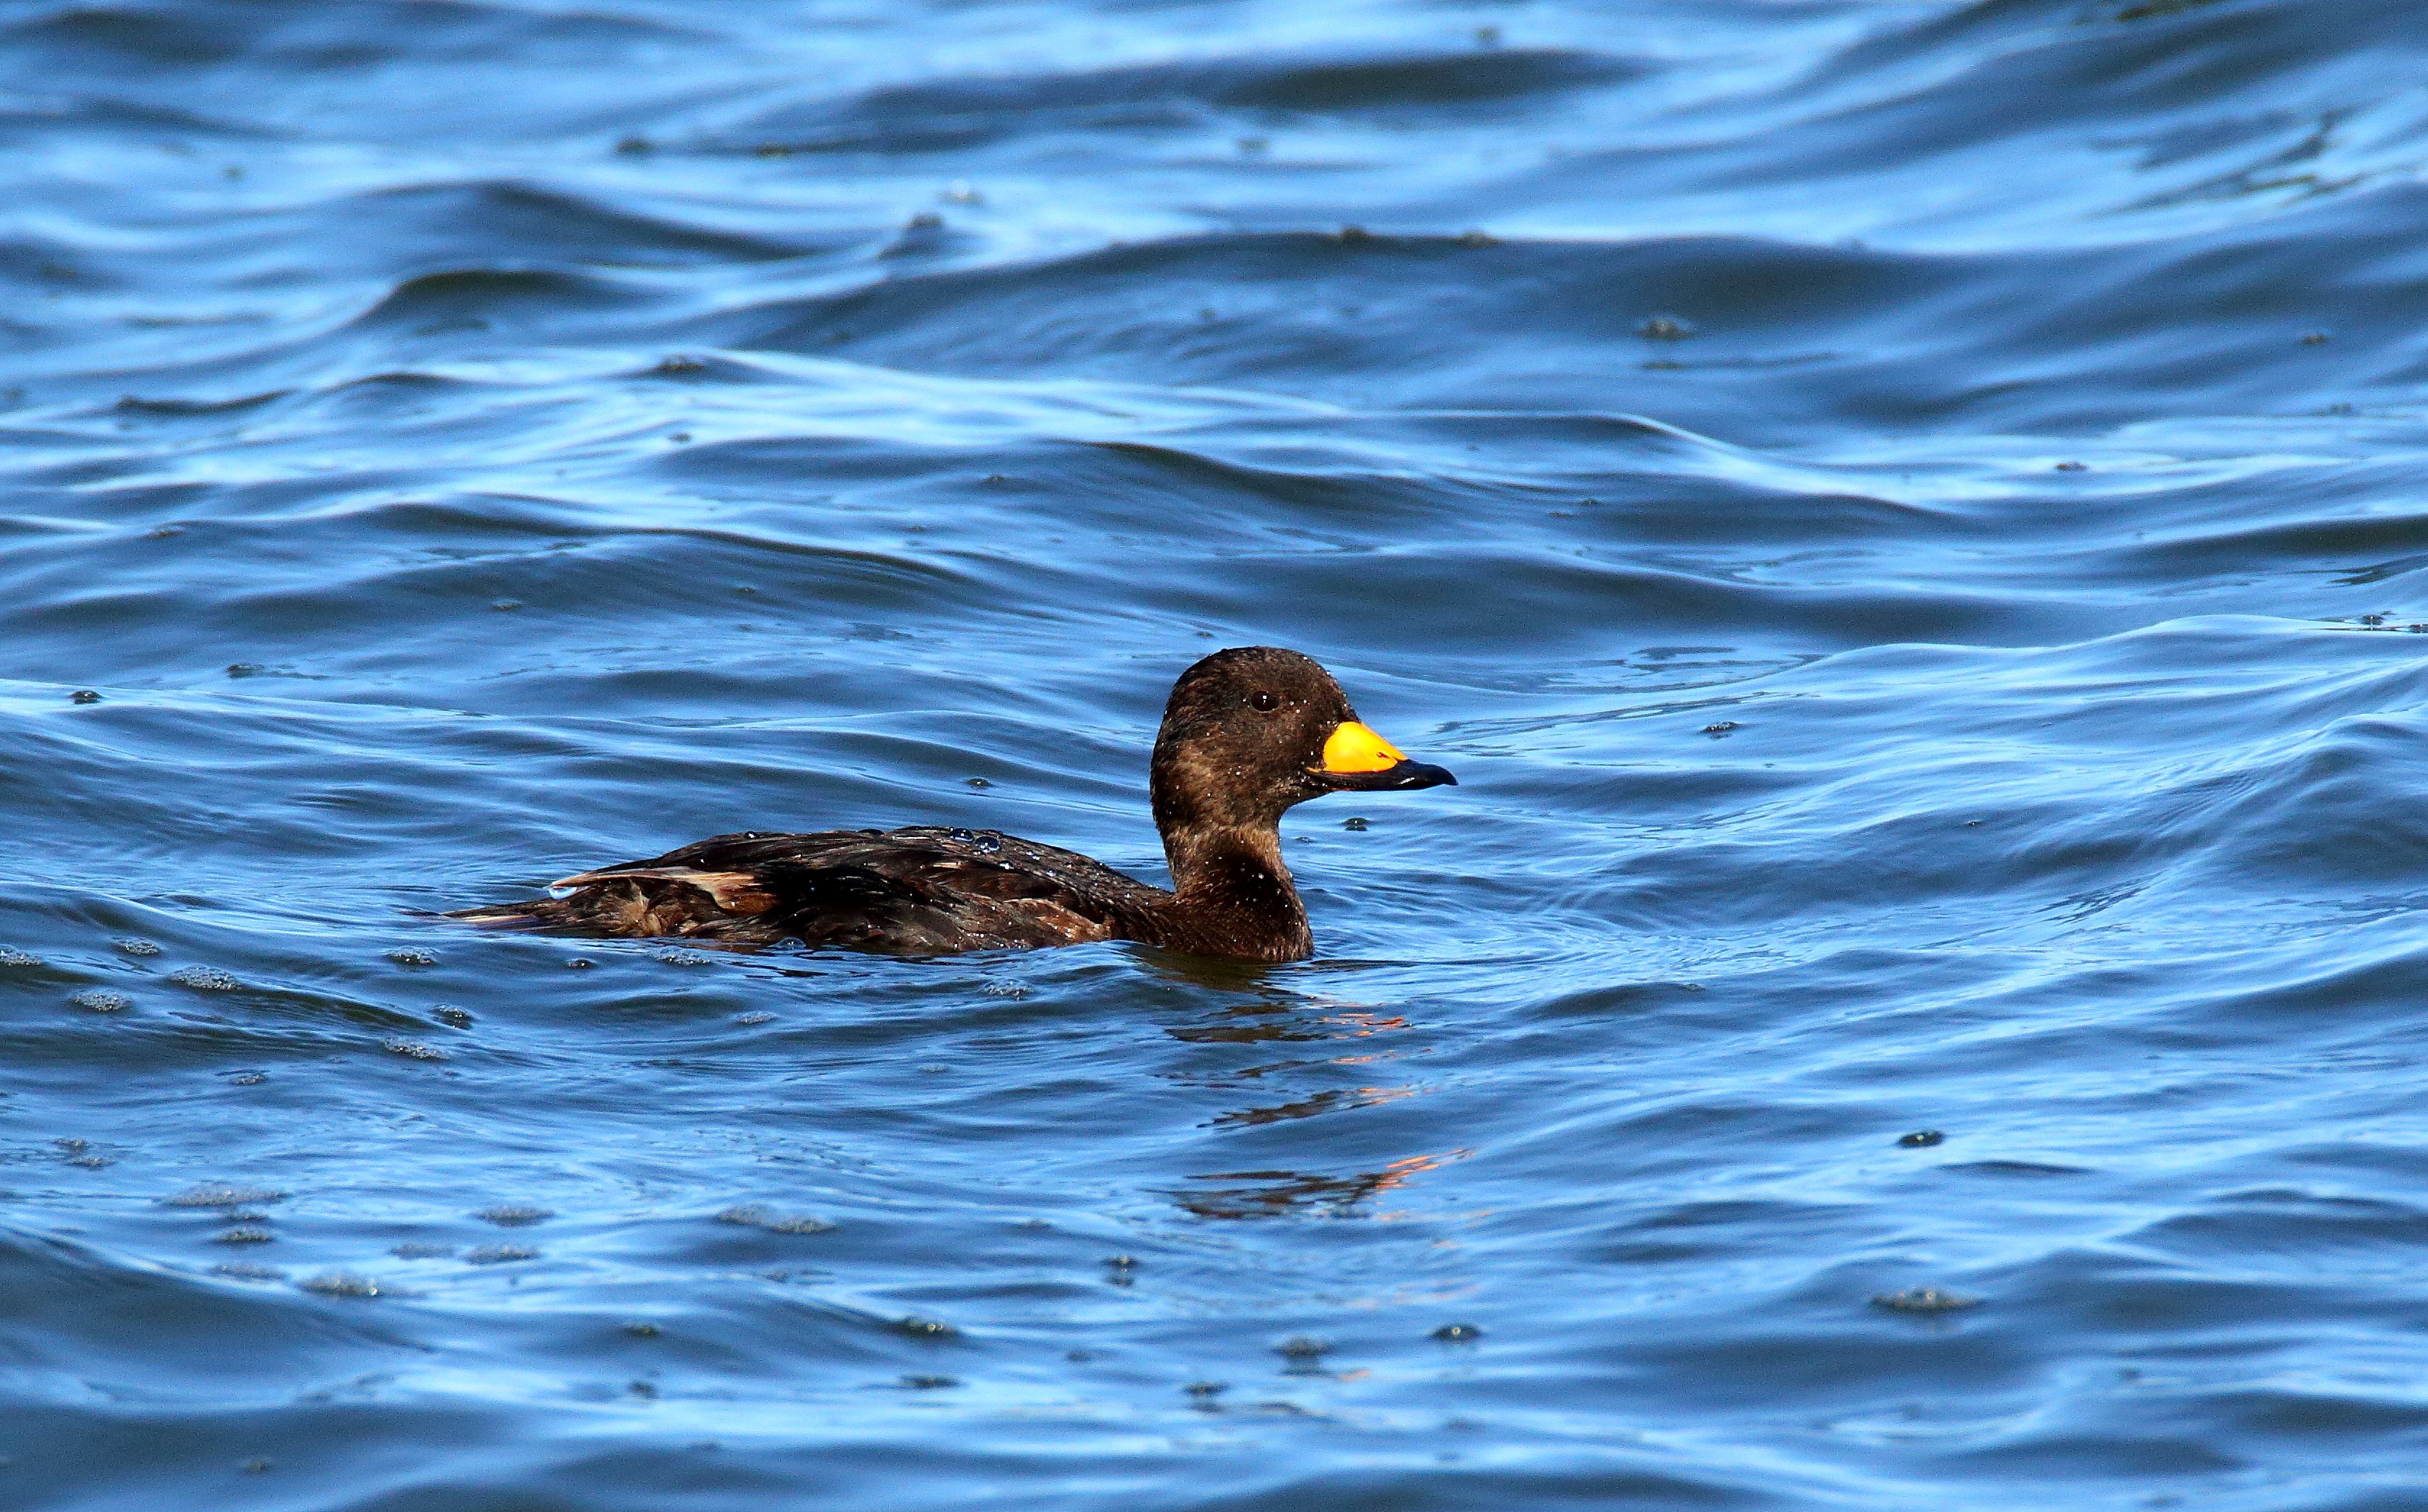 Many diving ducks including Black Scoter can be found in the Narrows. Photo: <a href=\"https://www.flickr.com/photos/120553232@N02/\" target=\"_blank\" >Isaac Grant</a>